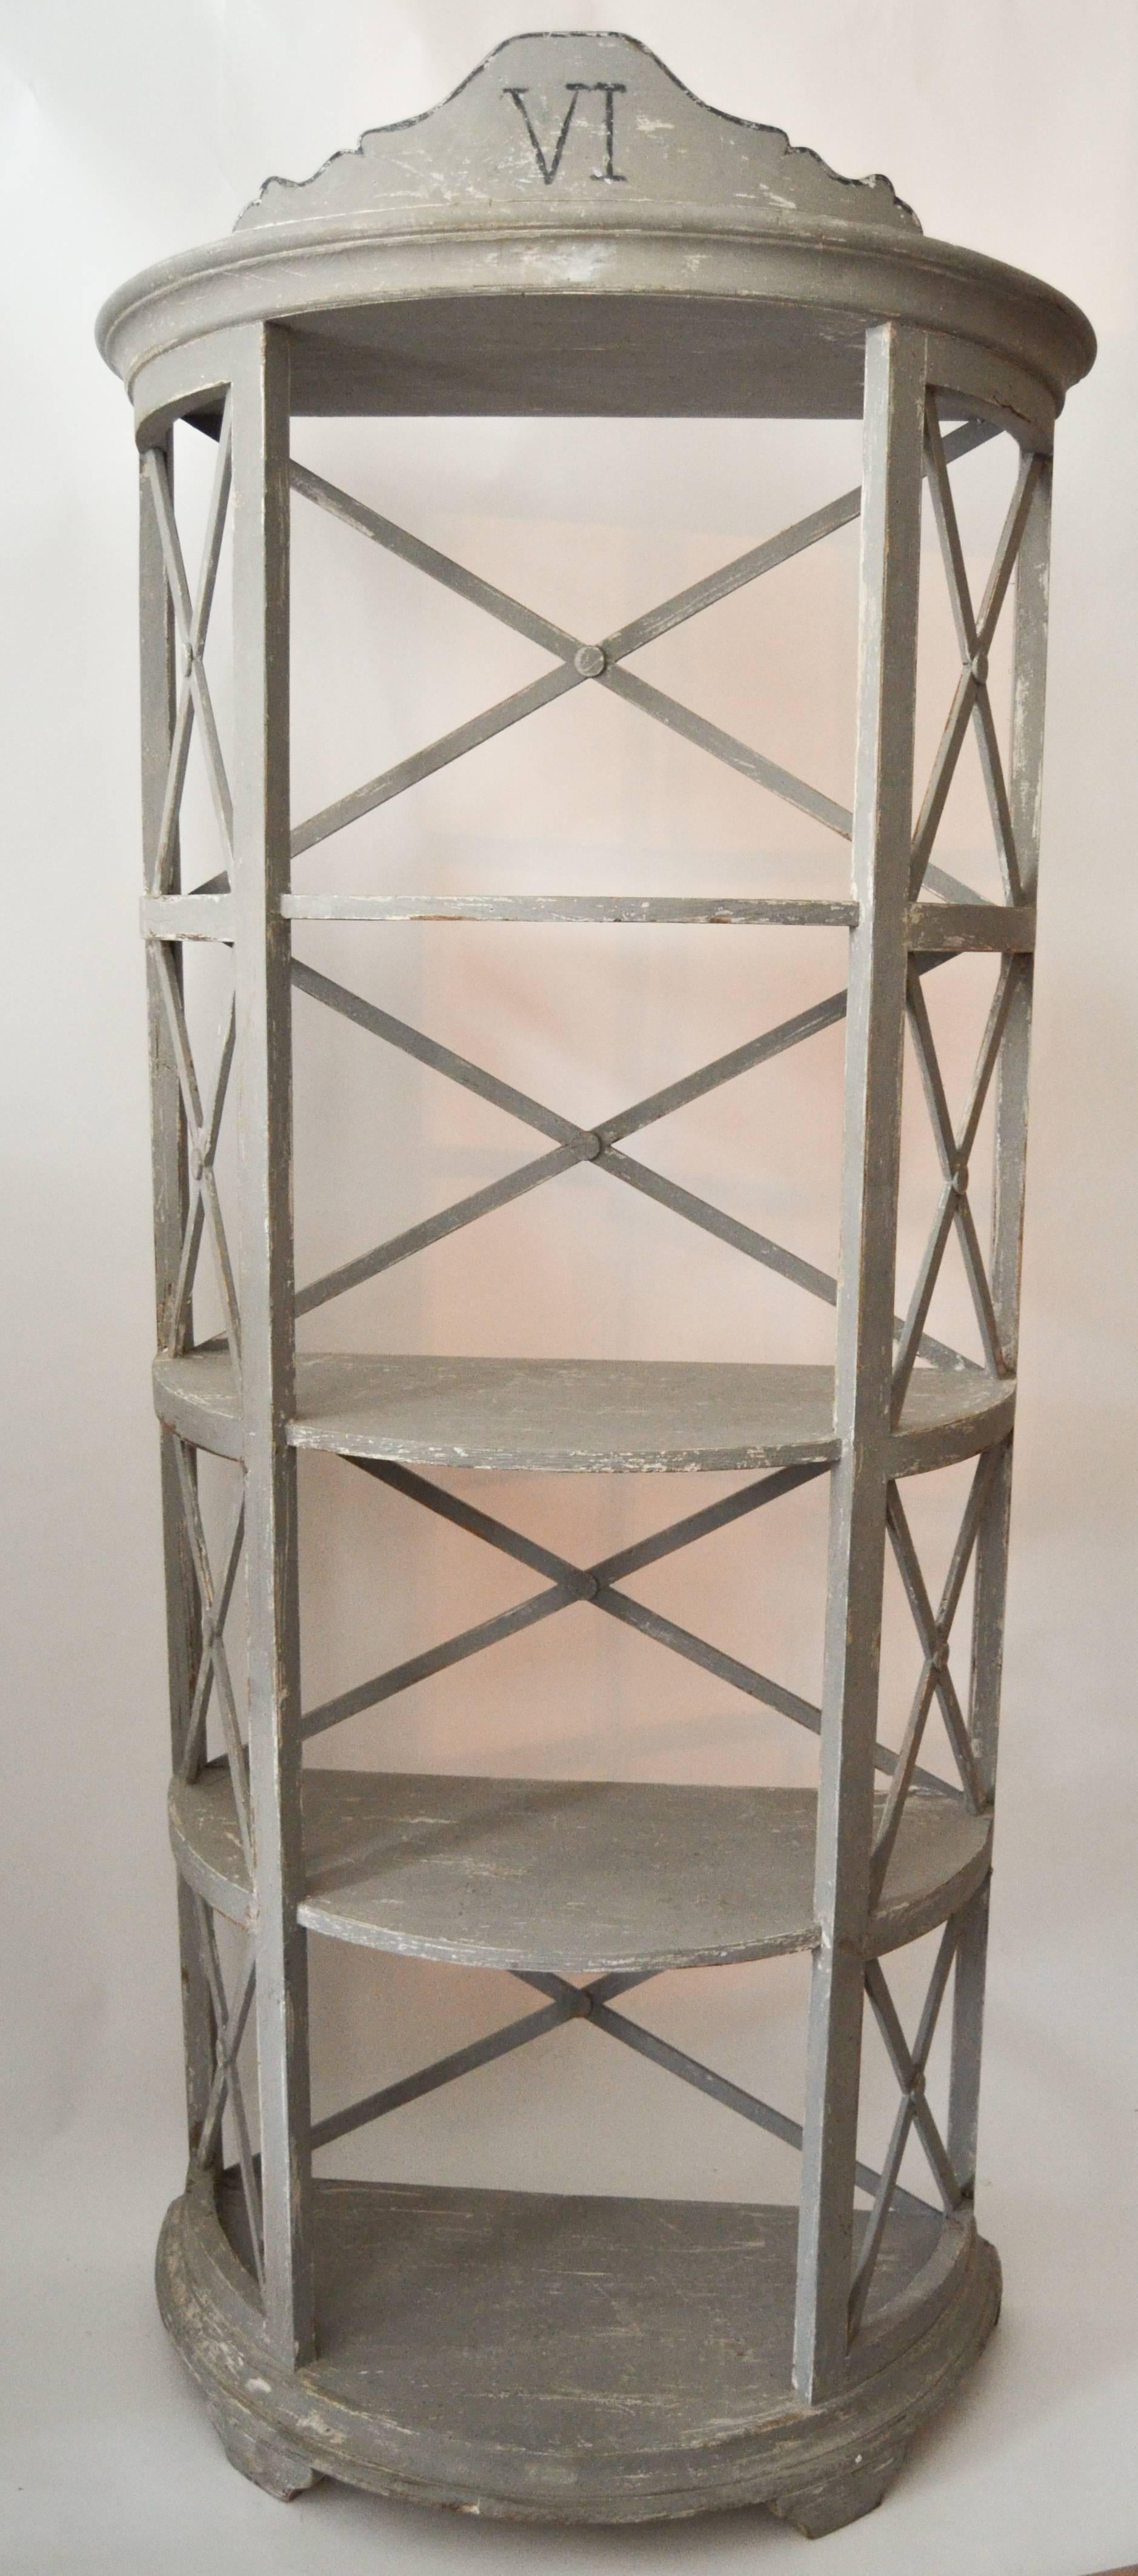 Pair of florentine demilune etagere painted in grey with multiple paint histories. Styled as old apothecary shelves each having four shelves with neoclassical and Victorian influences.